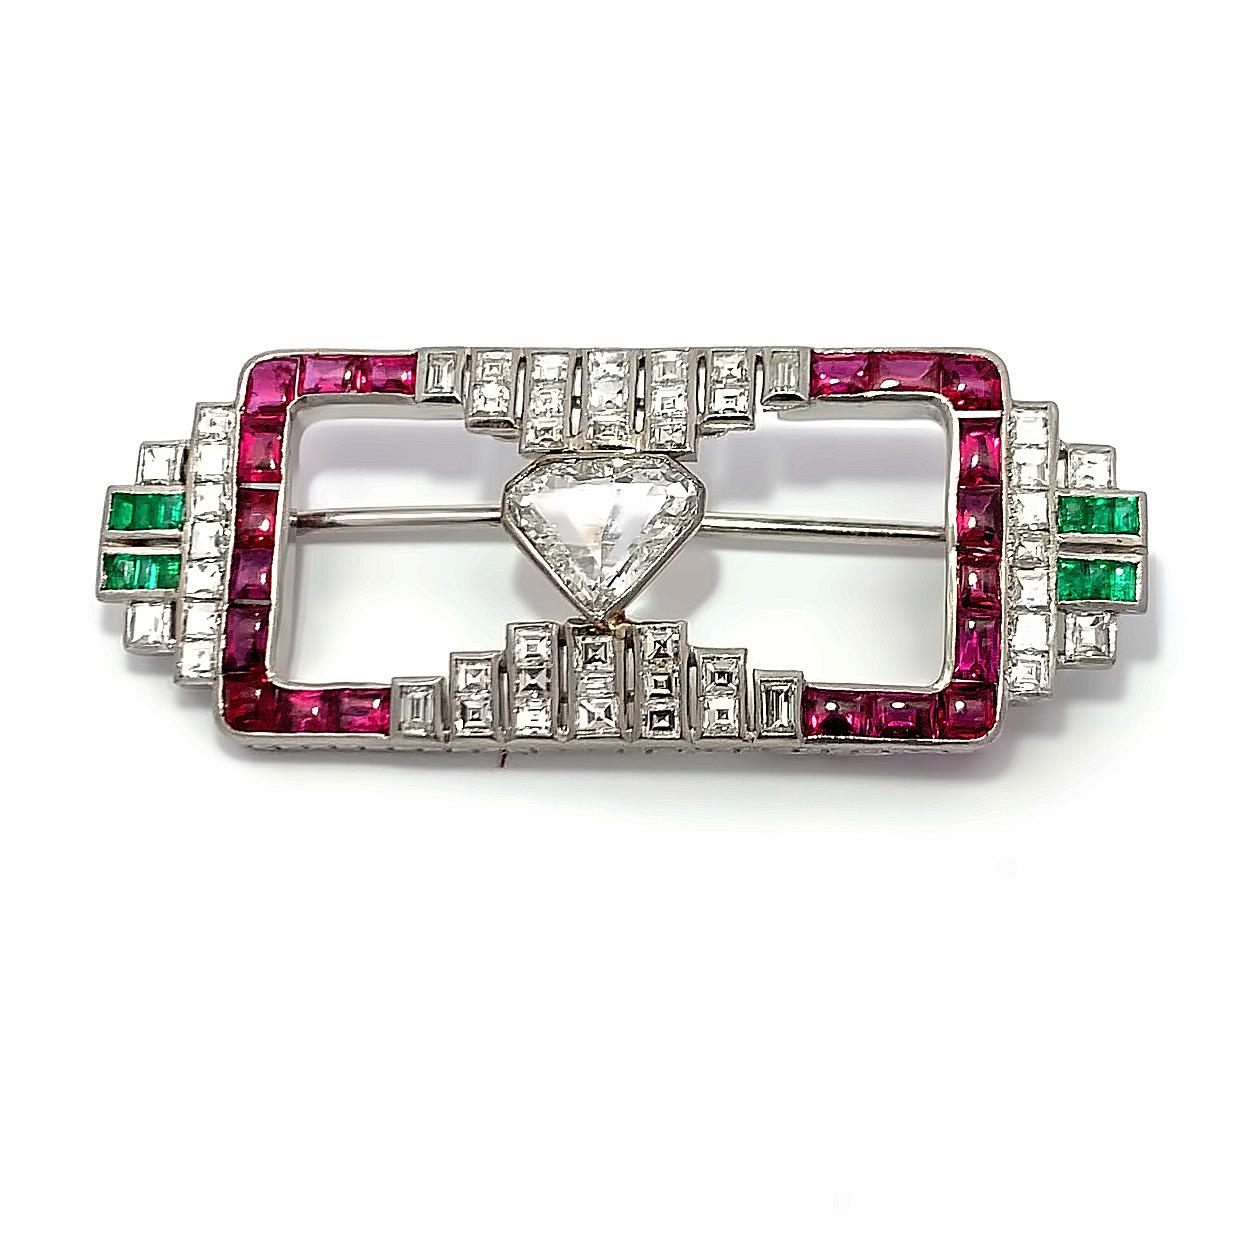 Art Deco Emerald Ruby and Diamond Brooch

An art deco platinum brooch set with diamonds, rubies, and emeralds. 

Approximate Stone Weights: 
Center Diamond: 1.18
Emeralds: .30
Buff top cabochon Rubies: 2.00
Baguettes: 2.60

Made circa